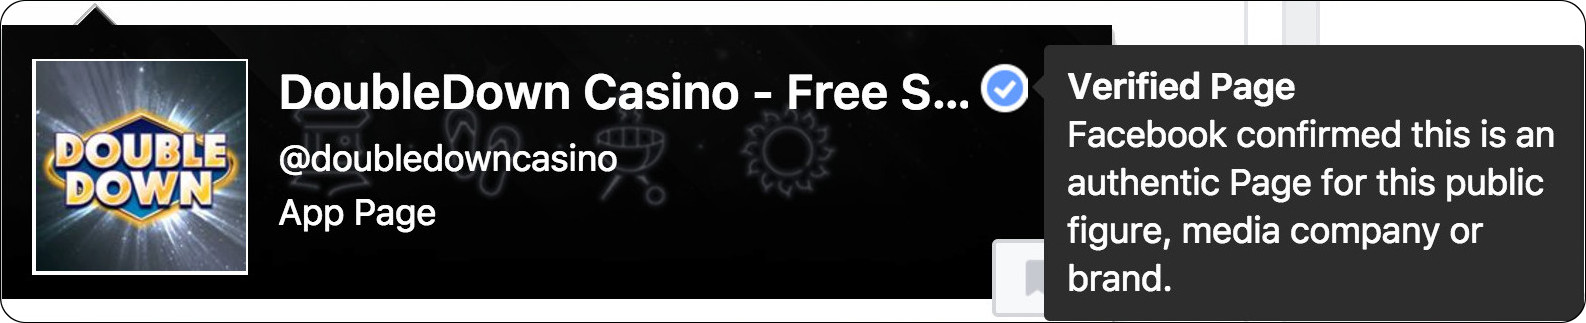 Play The Casino For Real Money With No Deposit - Wheaton's Slot